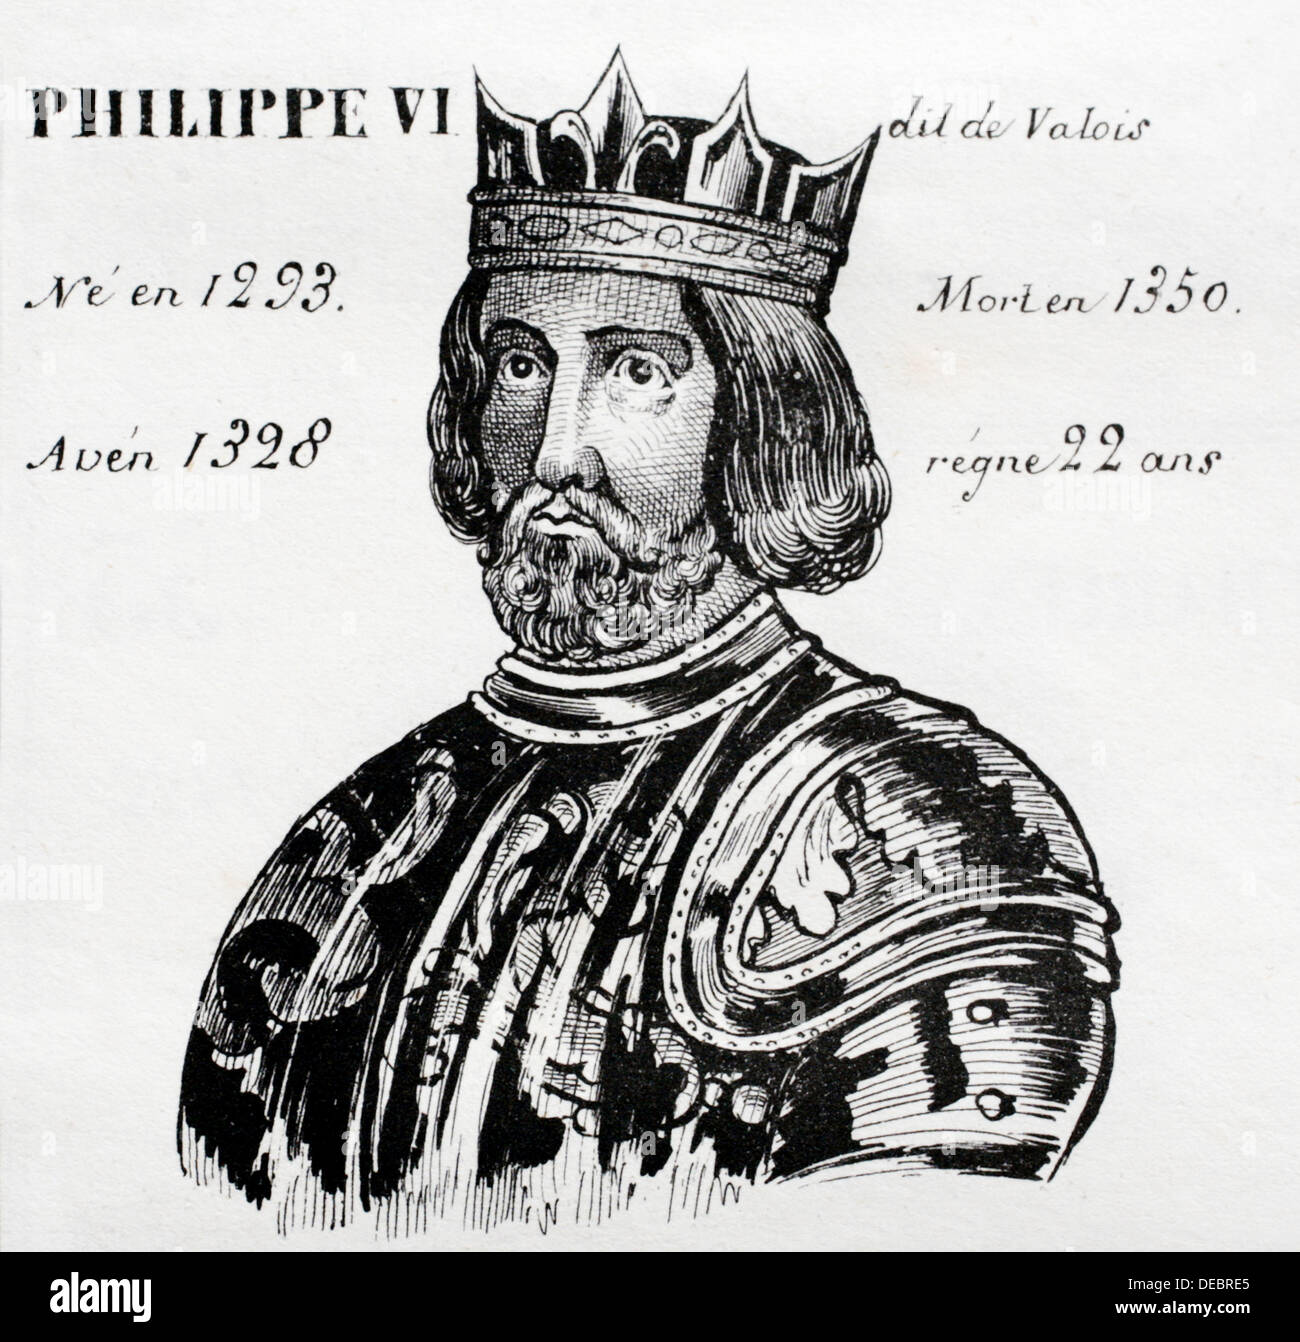 Philippe VI, dit le Valois, king of France from 1328 to 1350. History of France, by  J.Henry (Paris, 1842) Stock Photo